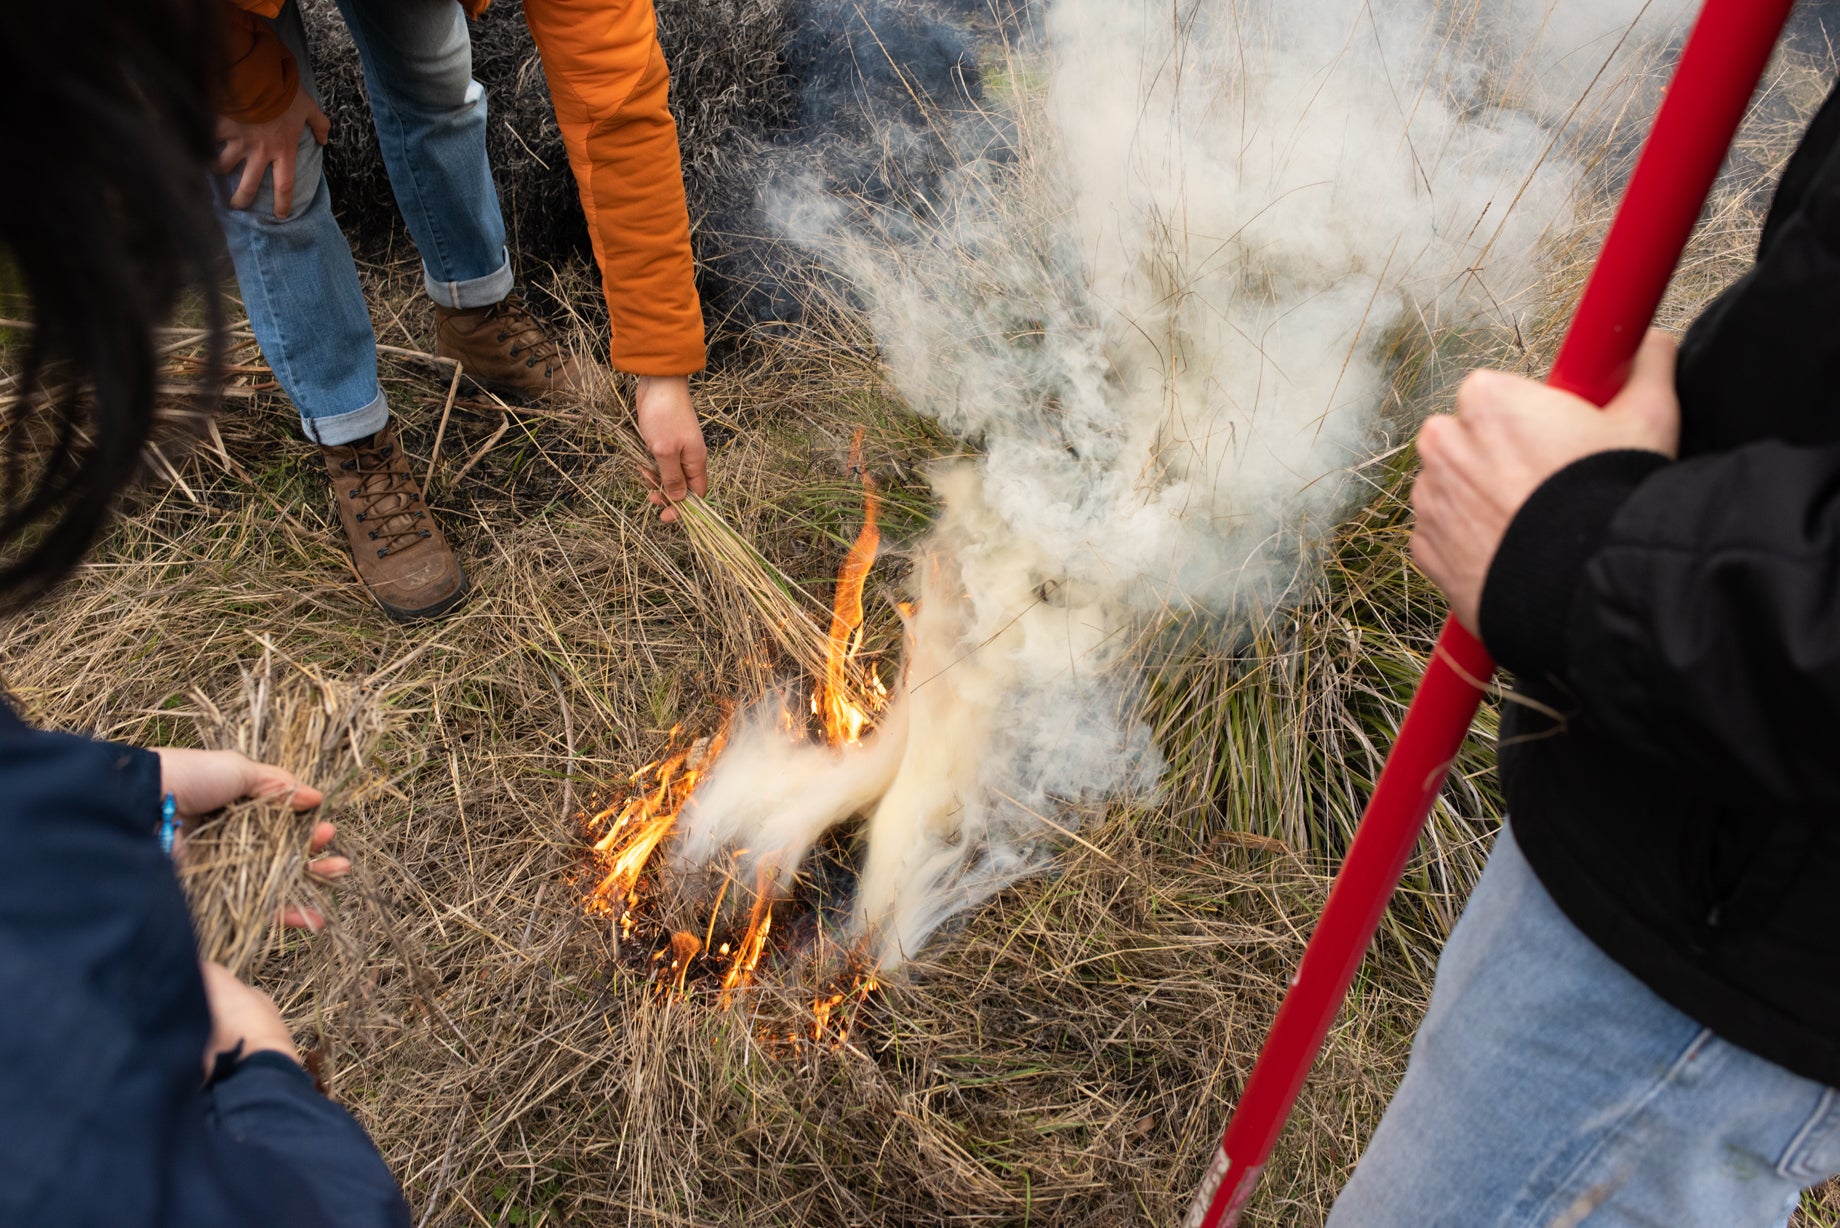 a small flame ignites dried grass as three people with red-handled tools are visible from waist down.